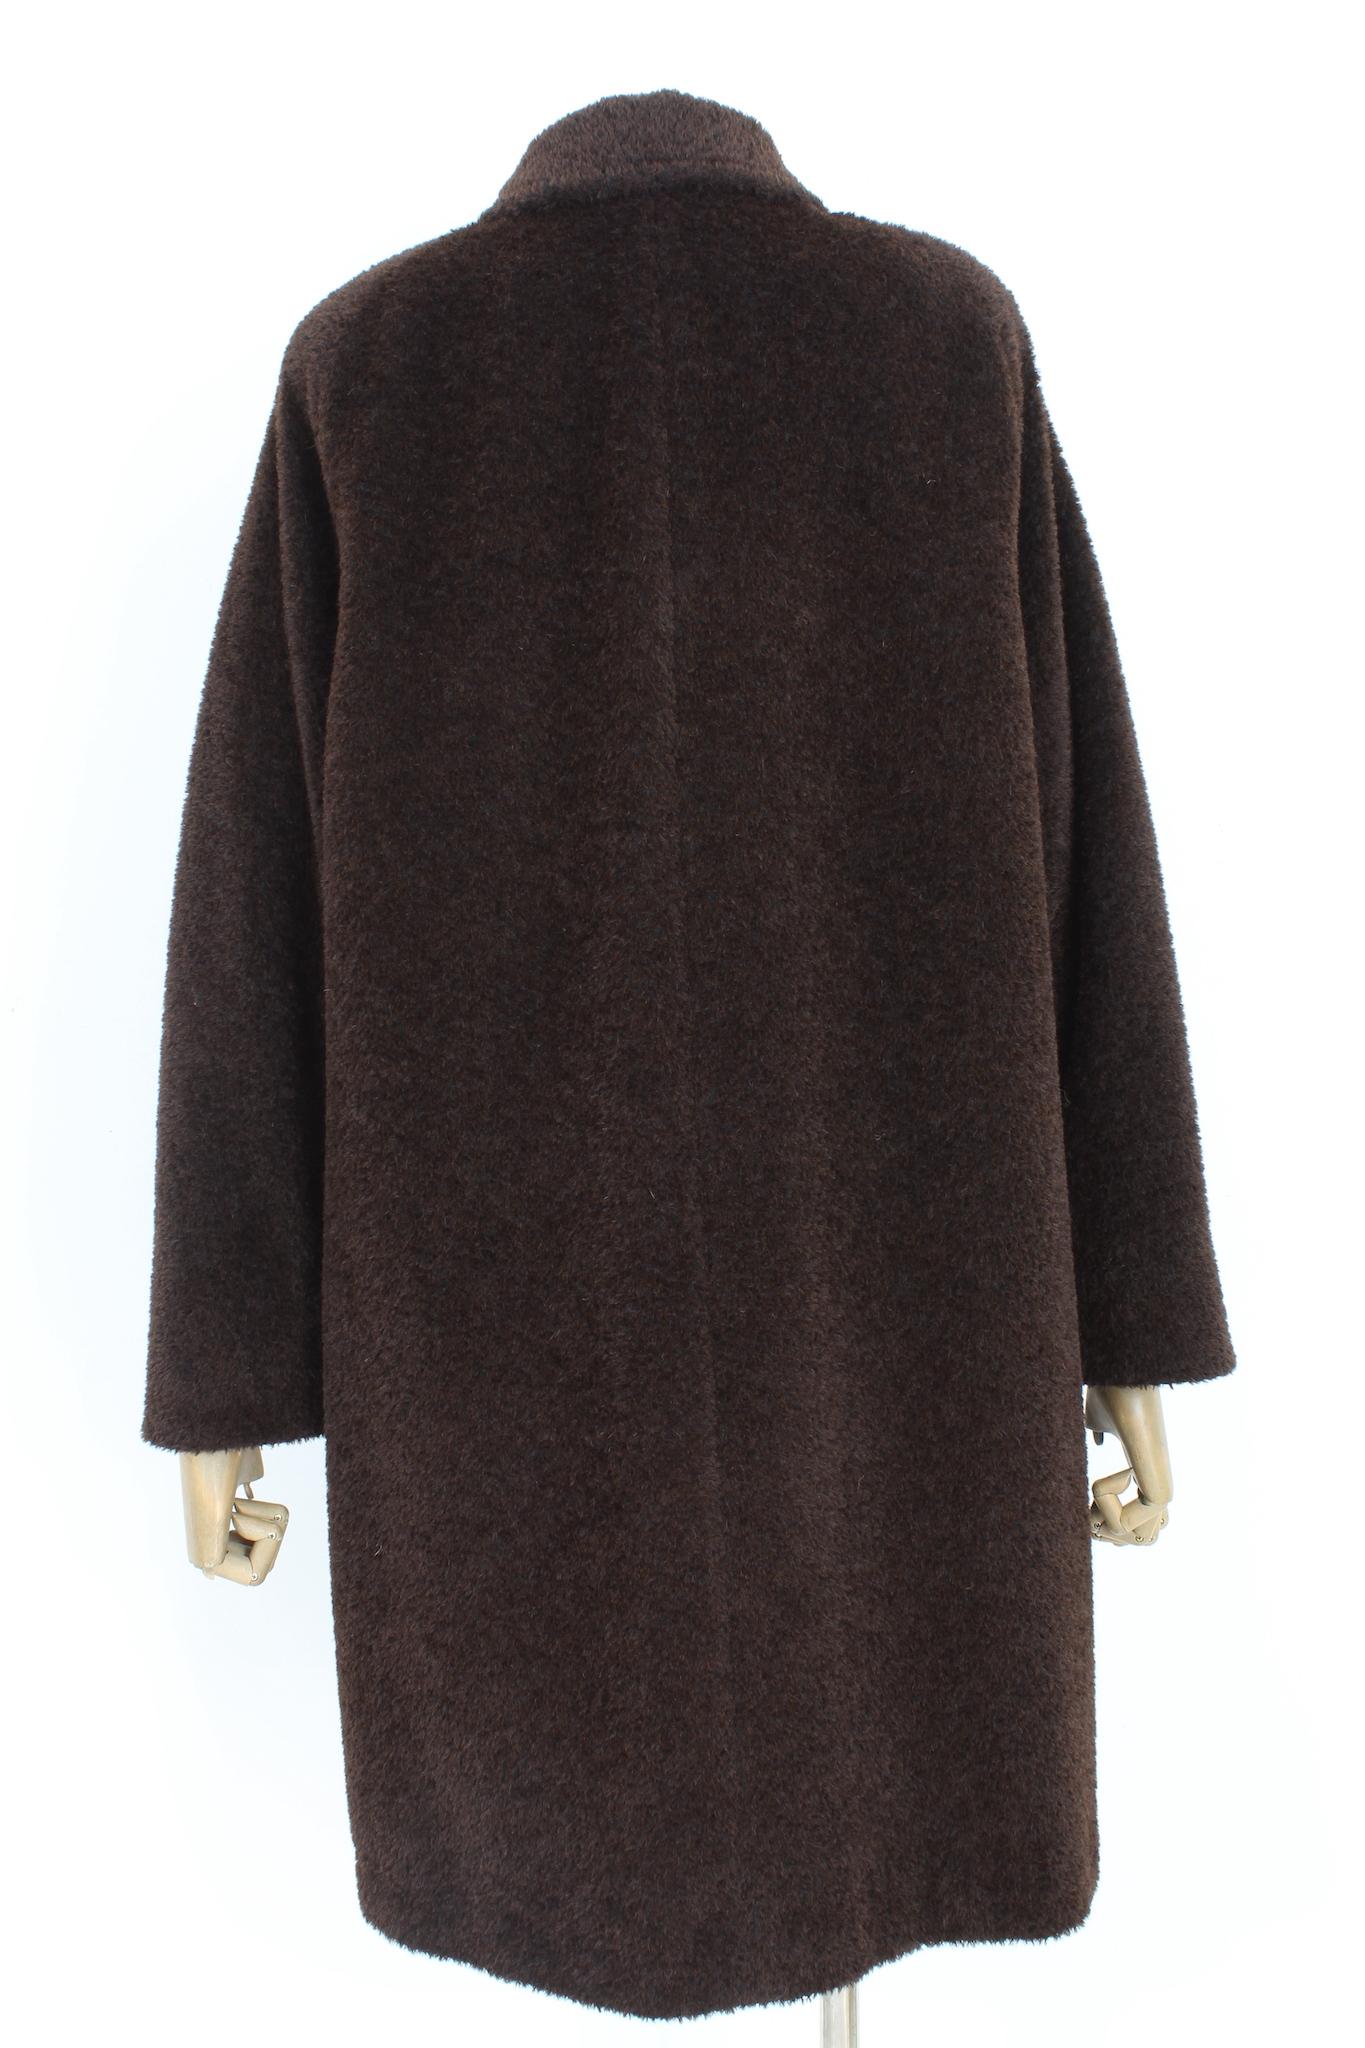 Max Mara 90s vintage coat. Long, enveloping model. Brown color, 56% alpaca, 44% wool fabric. Made in Italy.

Size: 42 IT 8 Us 10 Uk

Shoulder: 44 cm
Bust/Chest: 55 cm
Sleeve: 60 cm
Length: 104 cm